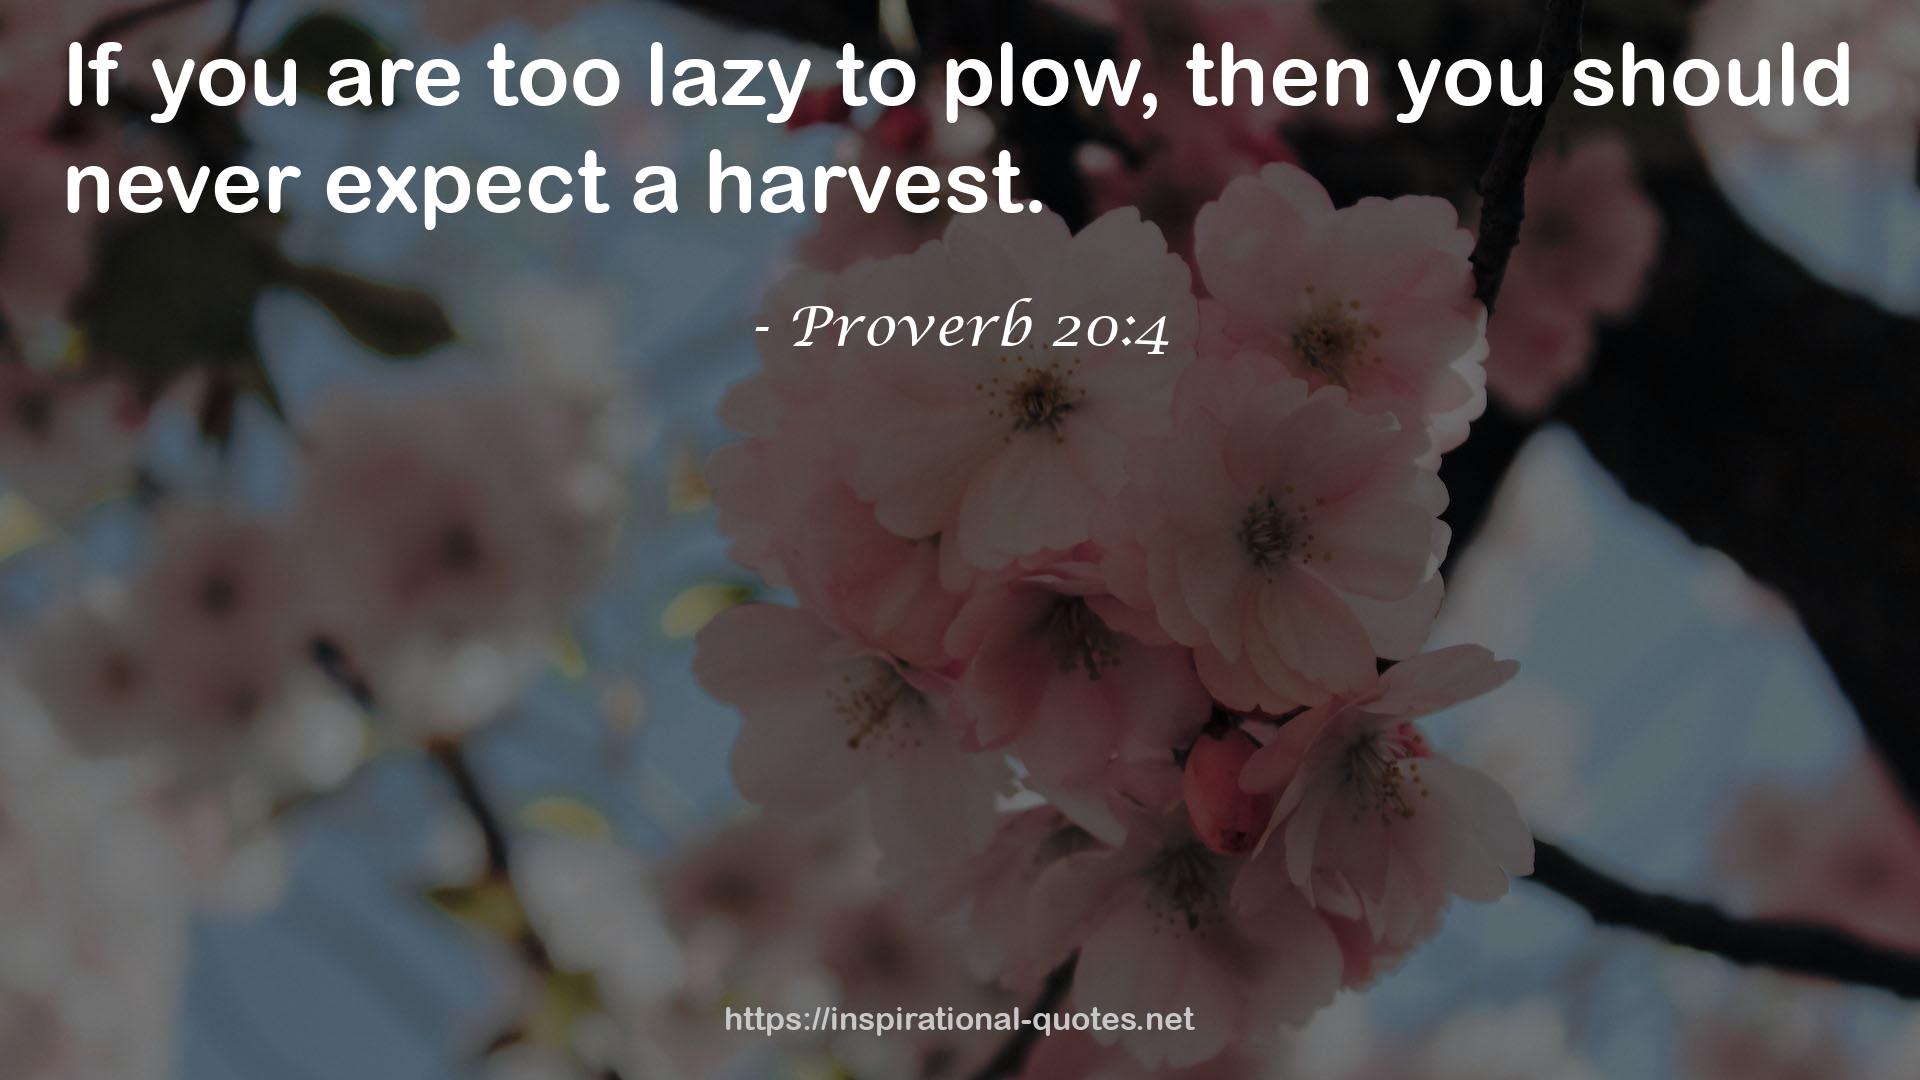 Proverb 20:4 QUOTES